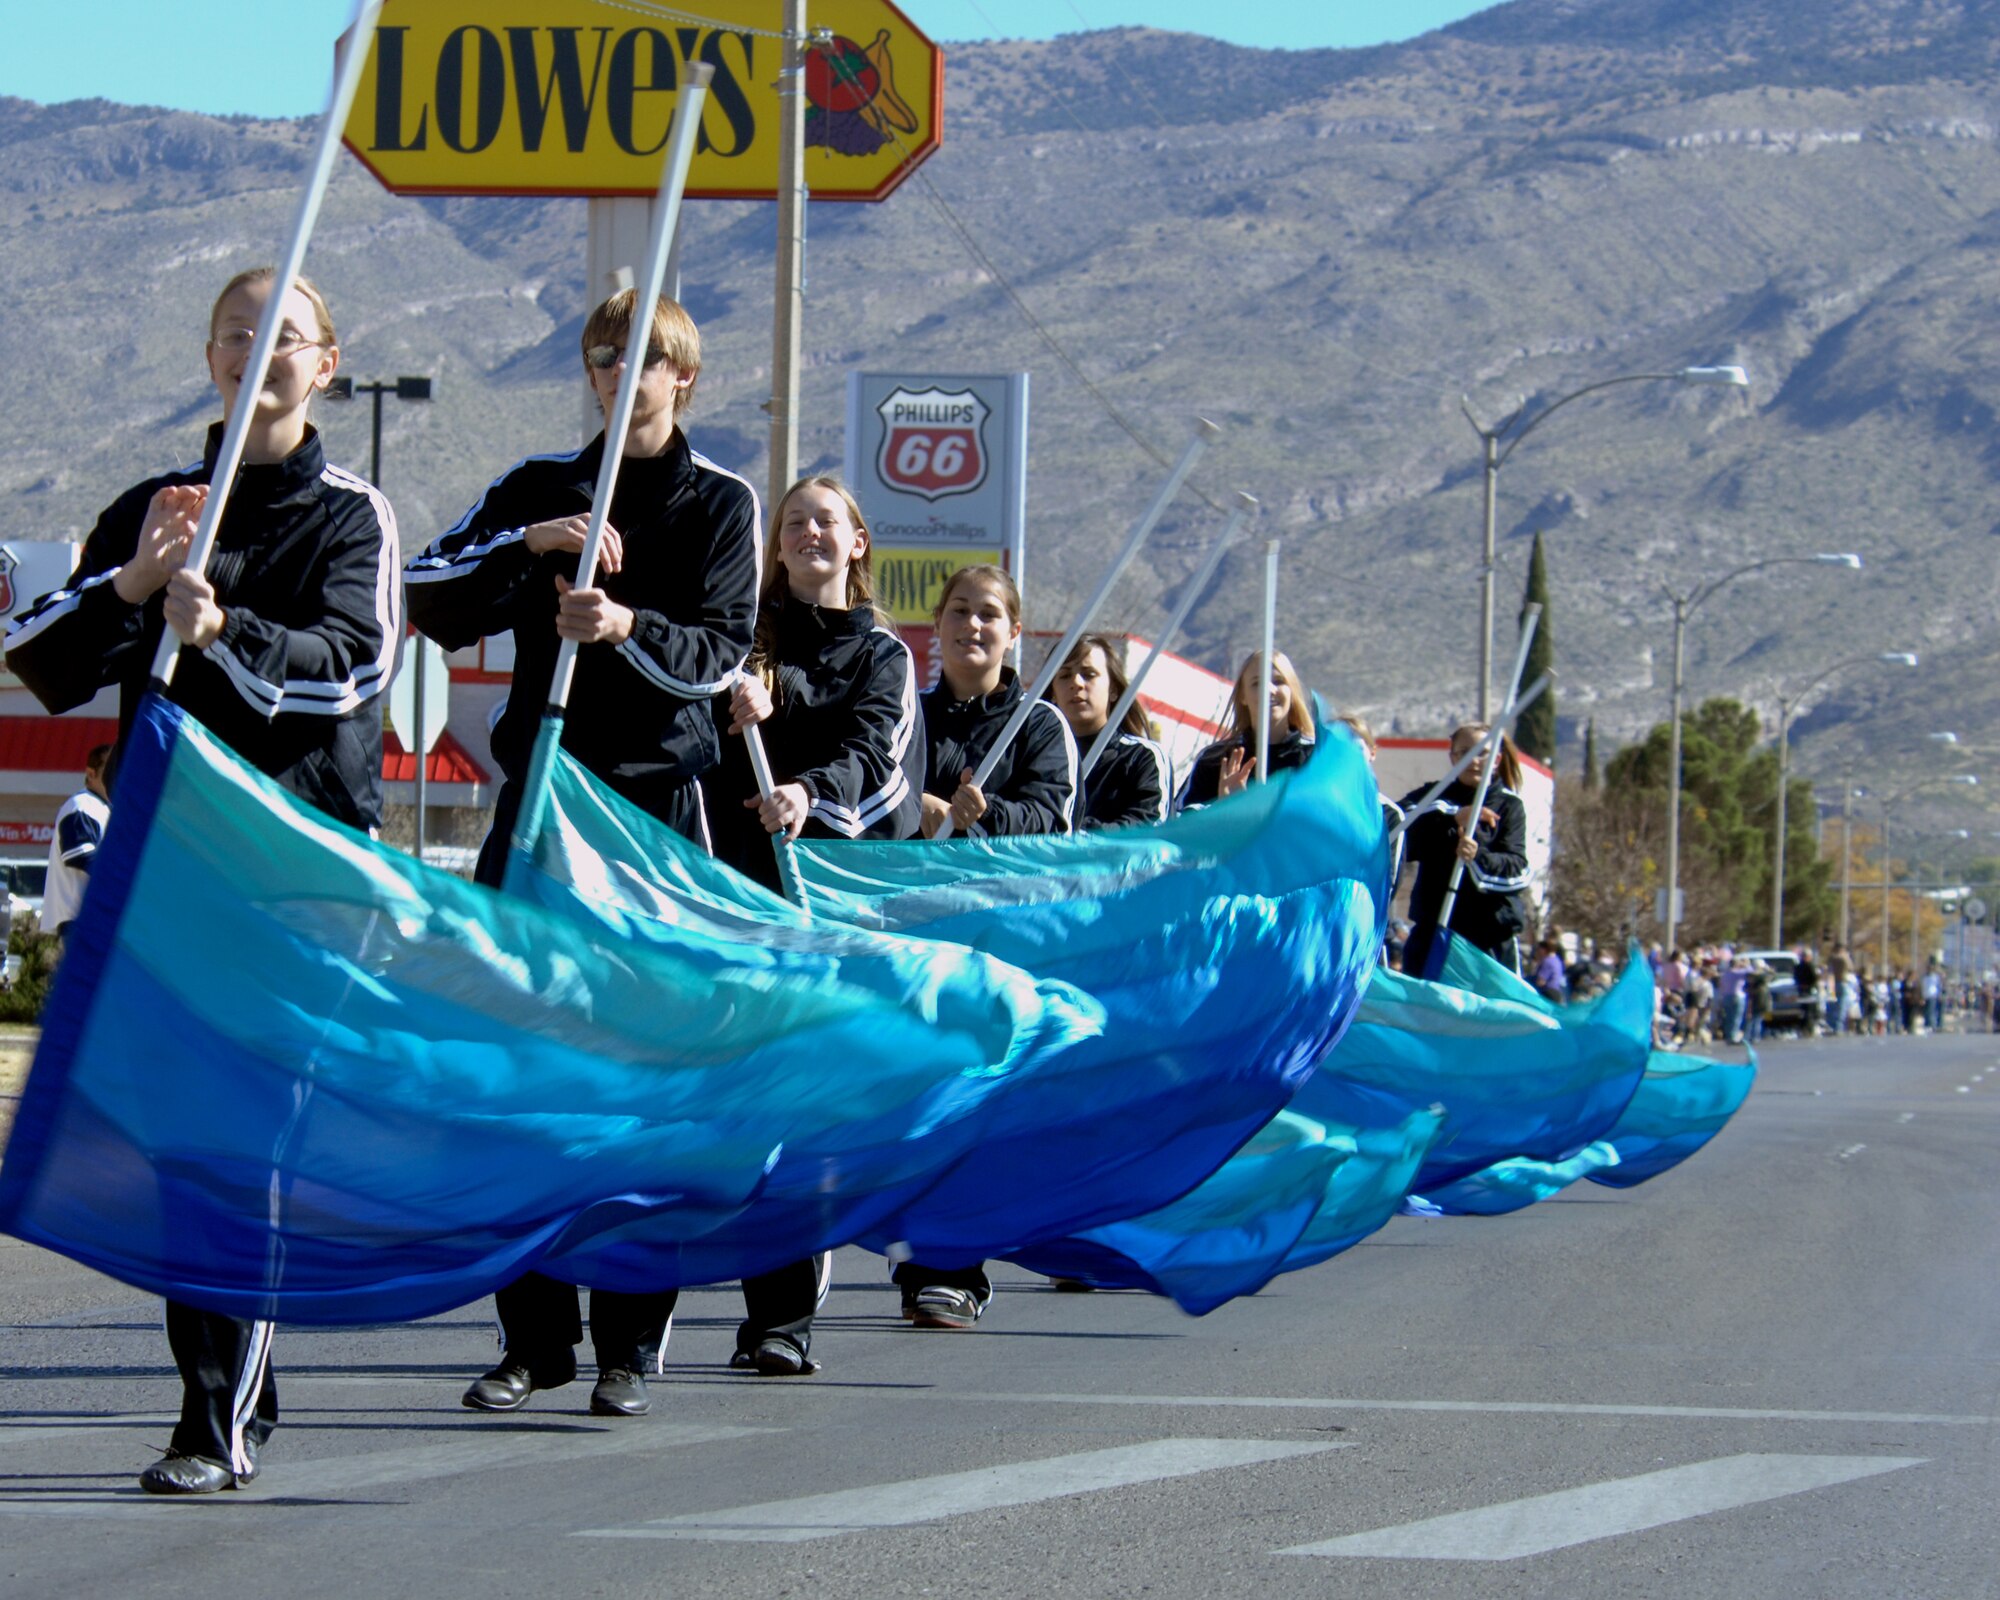 The Alamogordo High School color guard team marches down 10th Street during the Veterans Day parade, Nov. 8,  Alamogordo, N.M.The Veterans Day National Ceremony is held Nov. 11 each year at Arlington National Cemetery. A color guard made up of members from each of the military services, renders honors to America's war dead during a tradition-rich ceremony at the Tomb of the Unkowns.



(U.S. Air Force photo/ Senior Airman Anthony Nelson)
